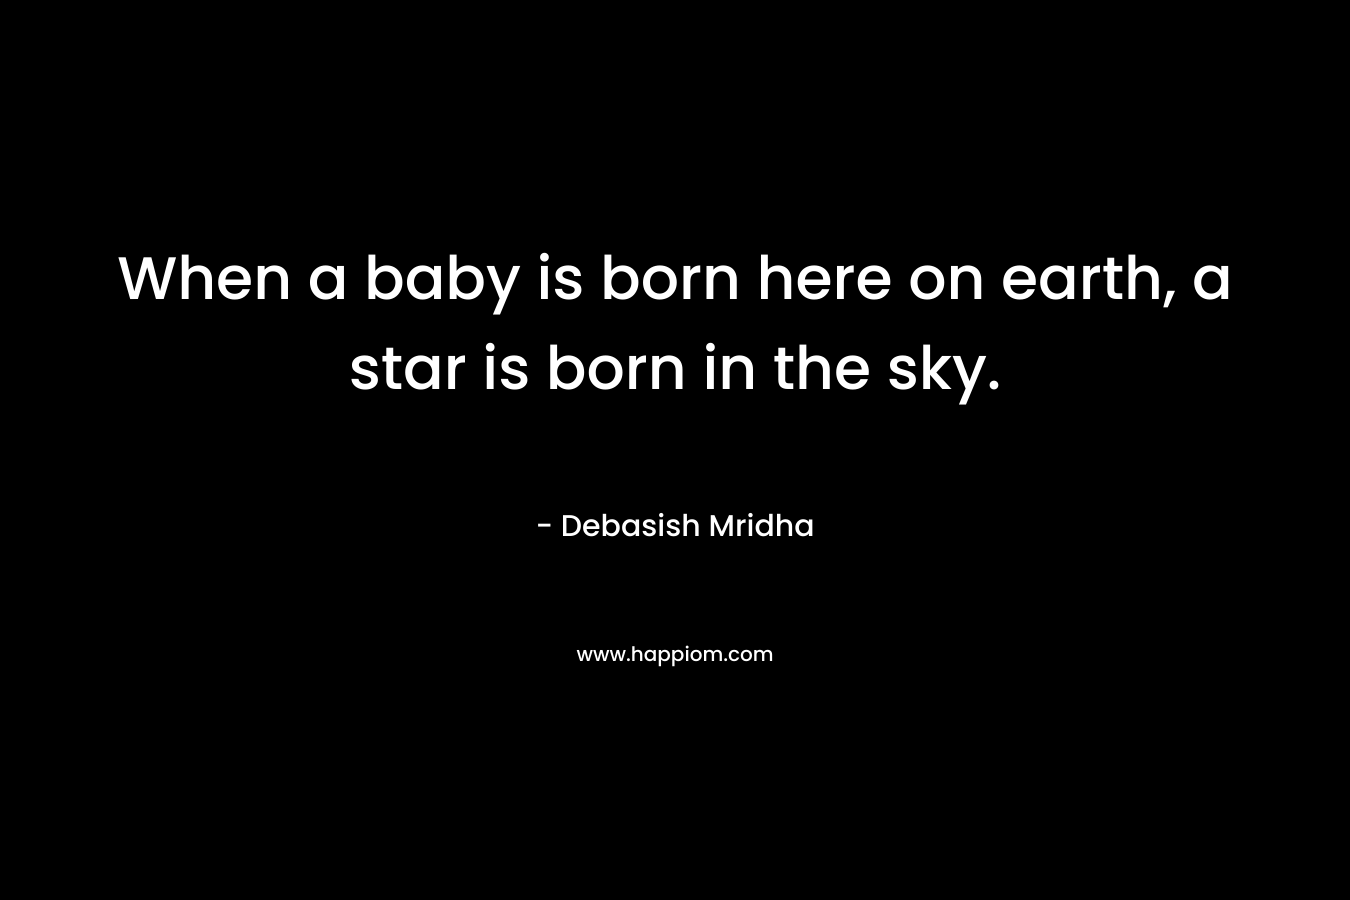 When a baby is born here on earth, a star is born in the sky.